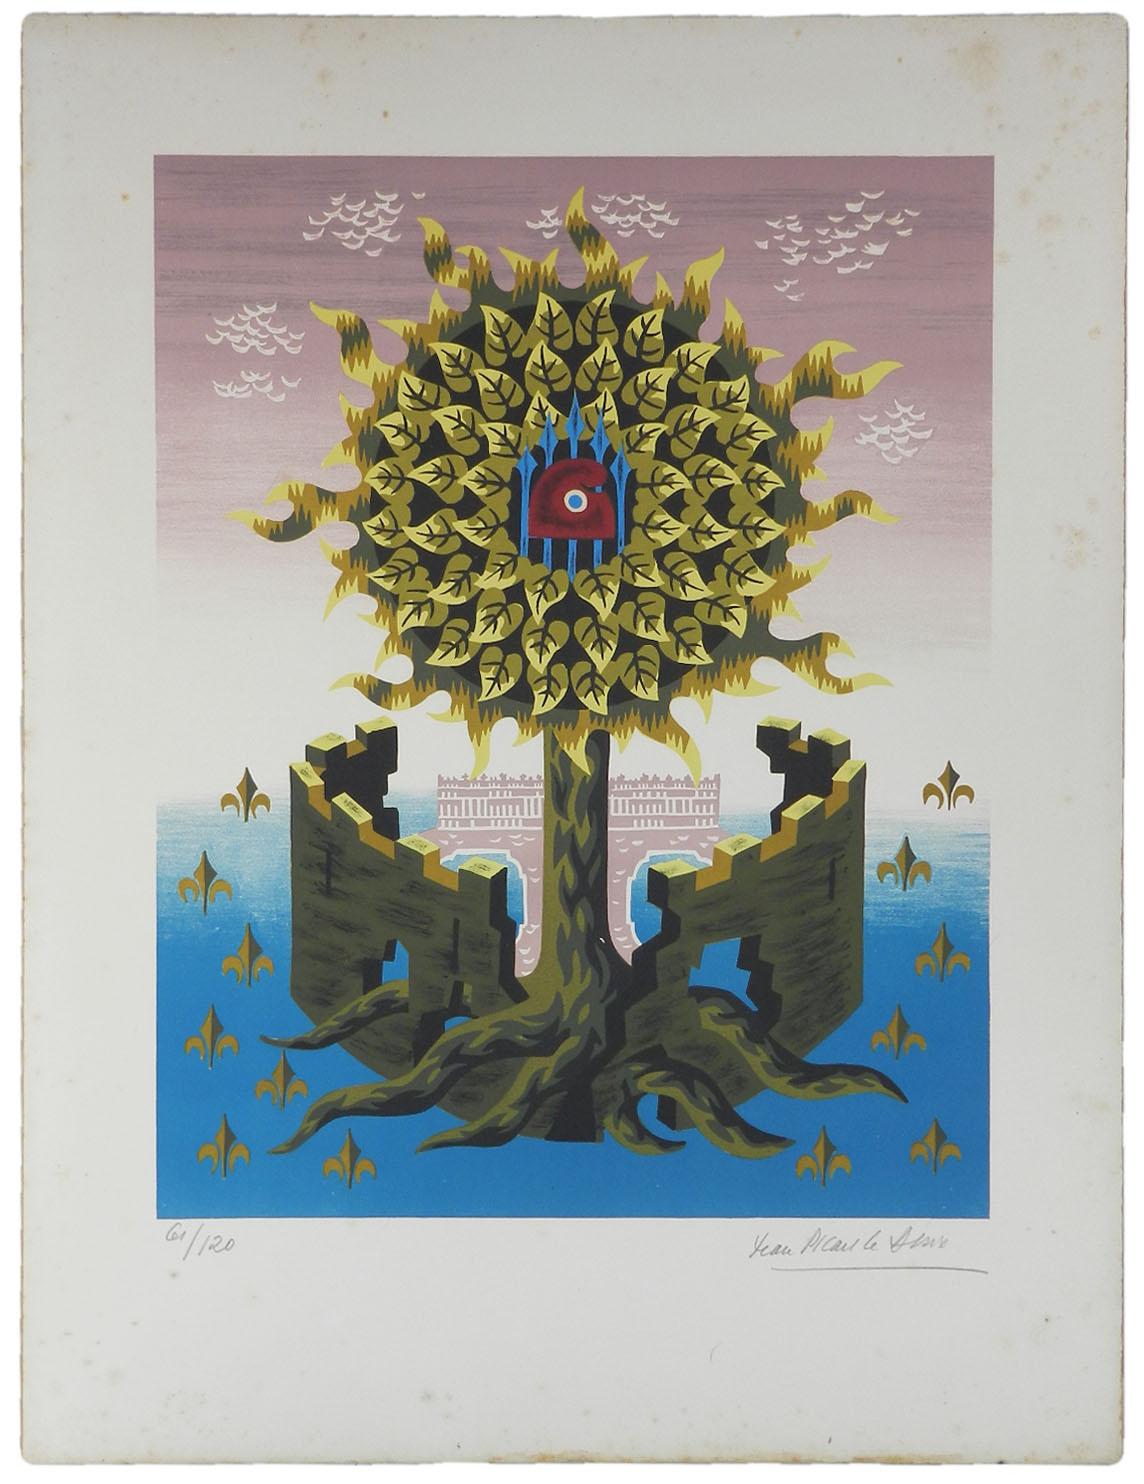 Jean Picart Le Doux signed Lithograph  
Limited edition this being number 61 of 120
Signed in pencil by the artist Jean Picart Le Doux, 1902-1982  French
Cartridge paper unframed
The Tree of Life a recurrent theme of his
Measures: Actual image